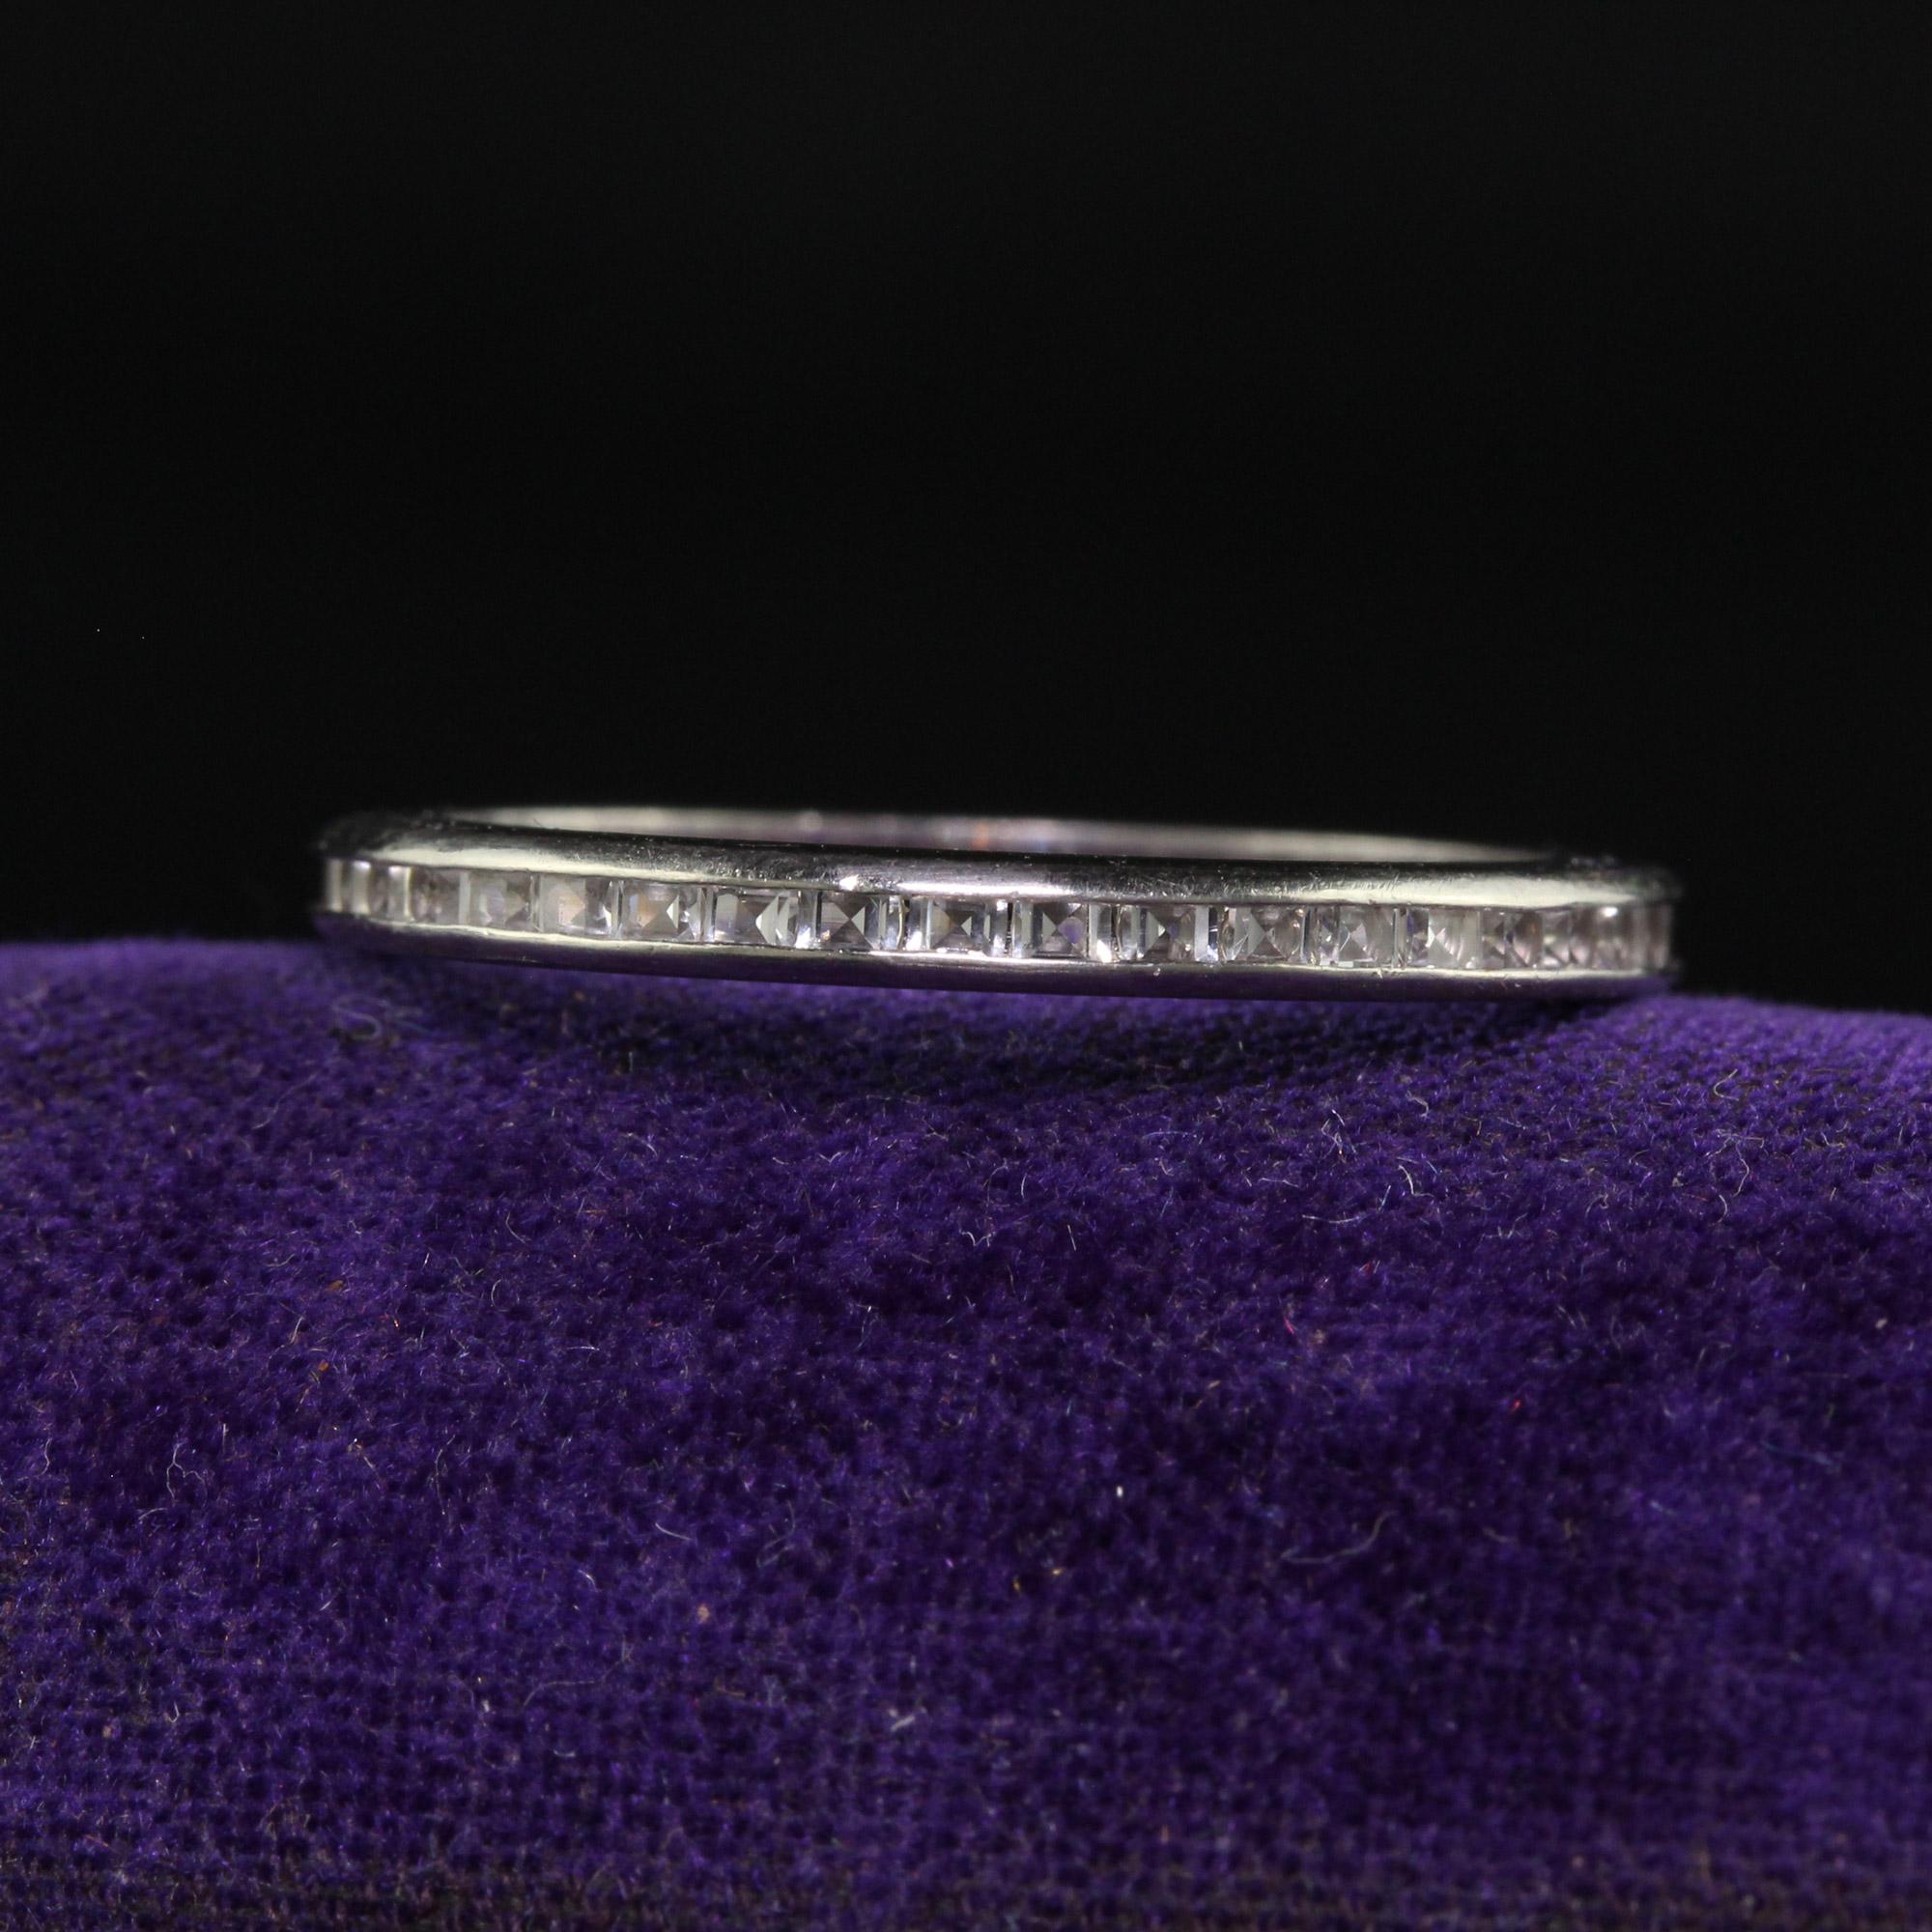 Beautiful Antique Art Deco Platinum French Old Mine Diamond Eternity Band - Size 4 3/4. This gorgeous art deco eternity band is crafted in platinum. There are old mine cut diamonds going around the entire band. The side of the ring has French